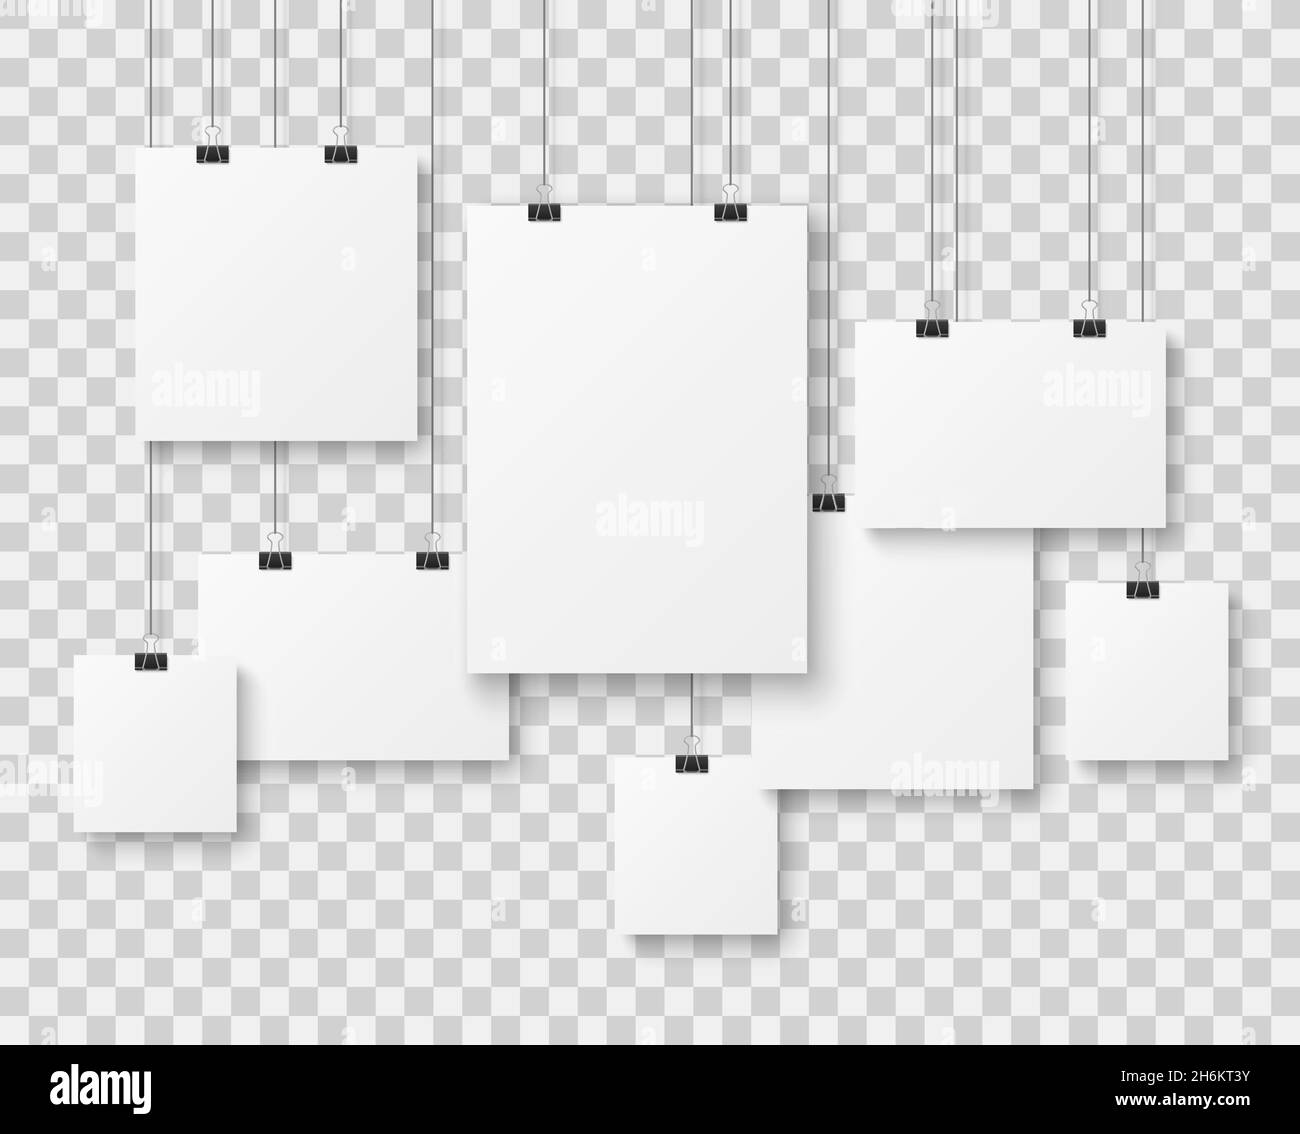 Blank picture gallery. Presentation paper posters, photo canvas clean advertising hanging banner on strings vector Stock Vector